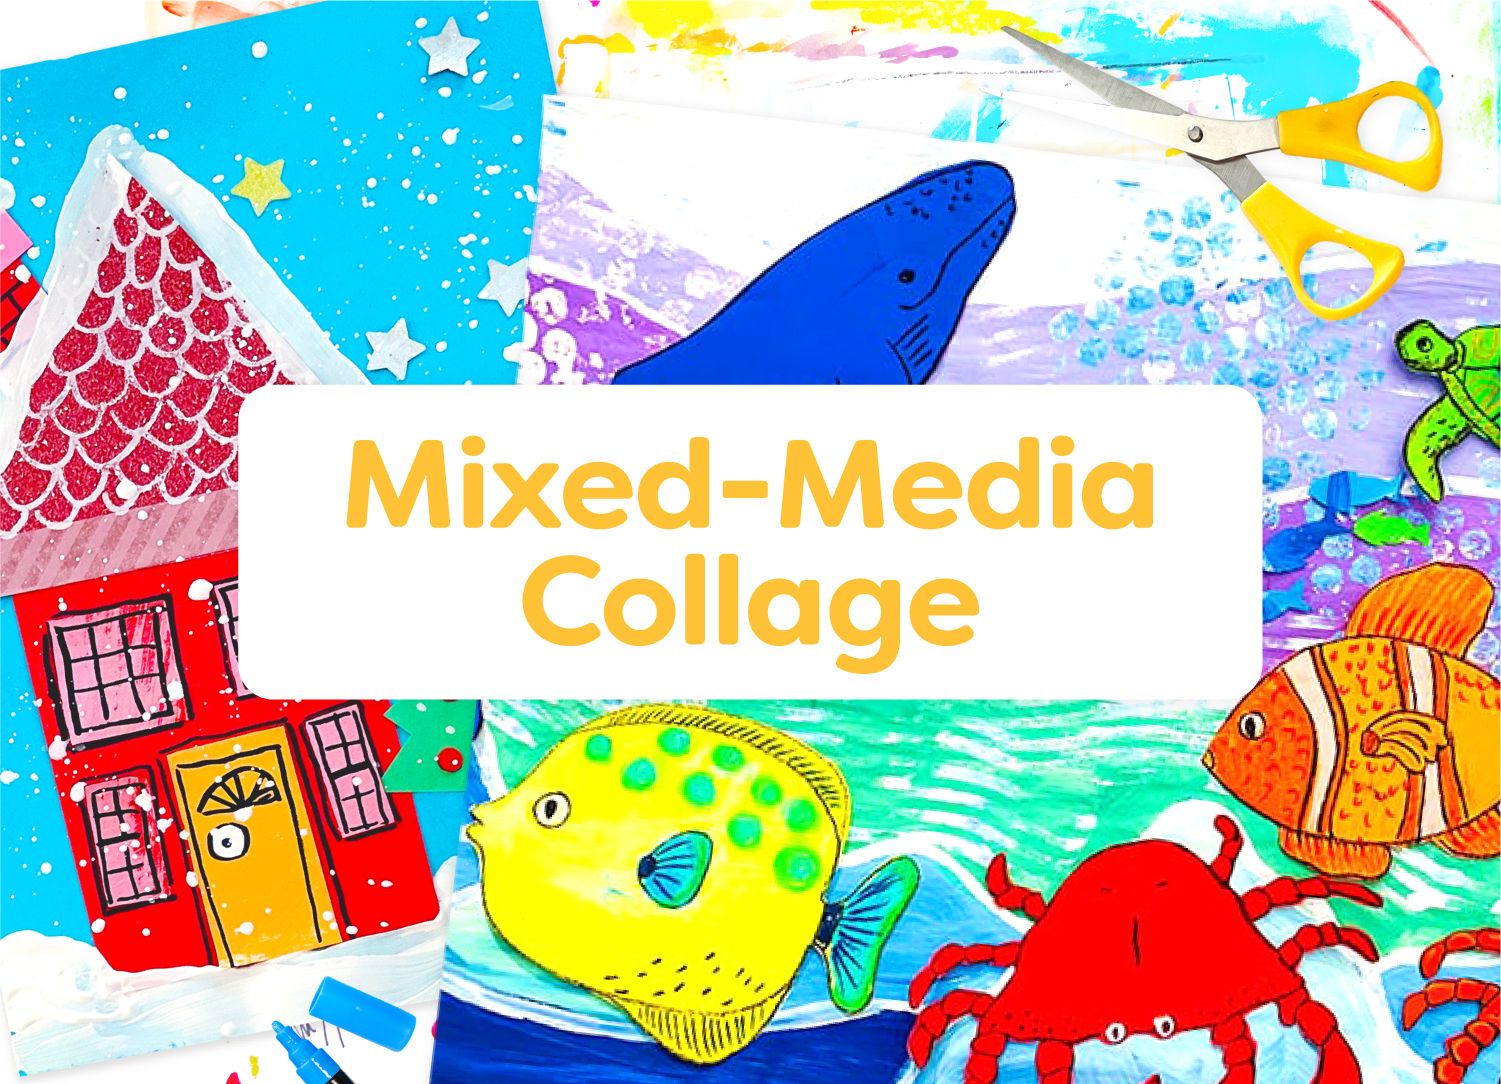 Mixed Media Collage; art lessons for kids by category